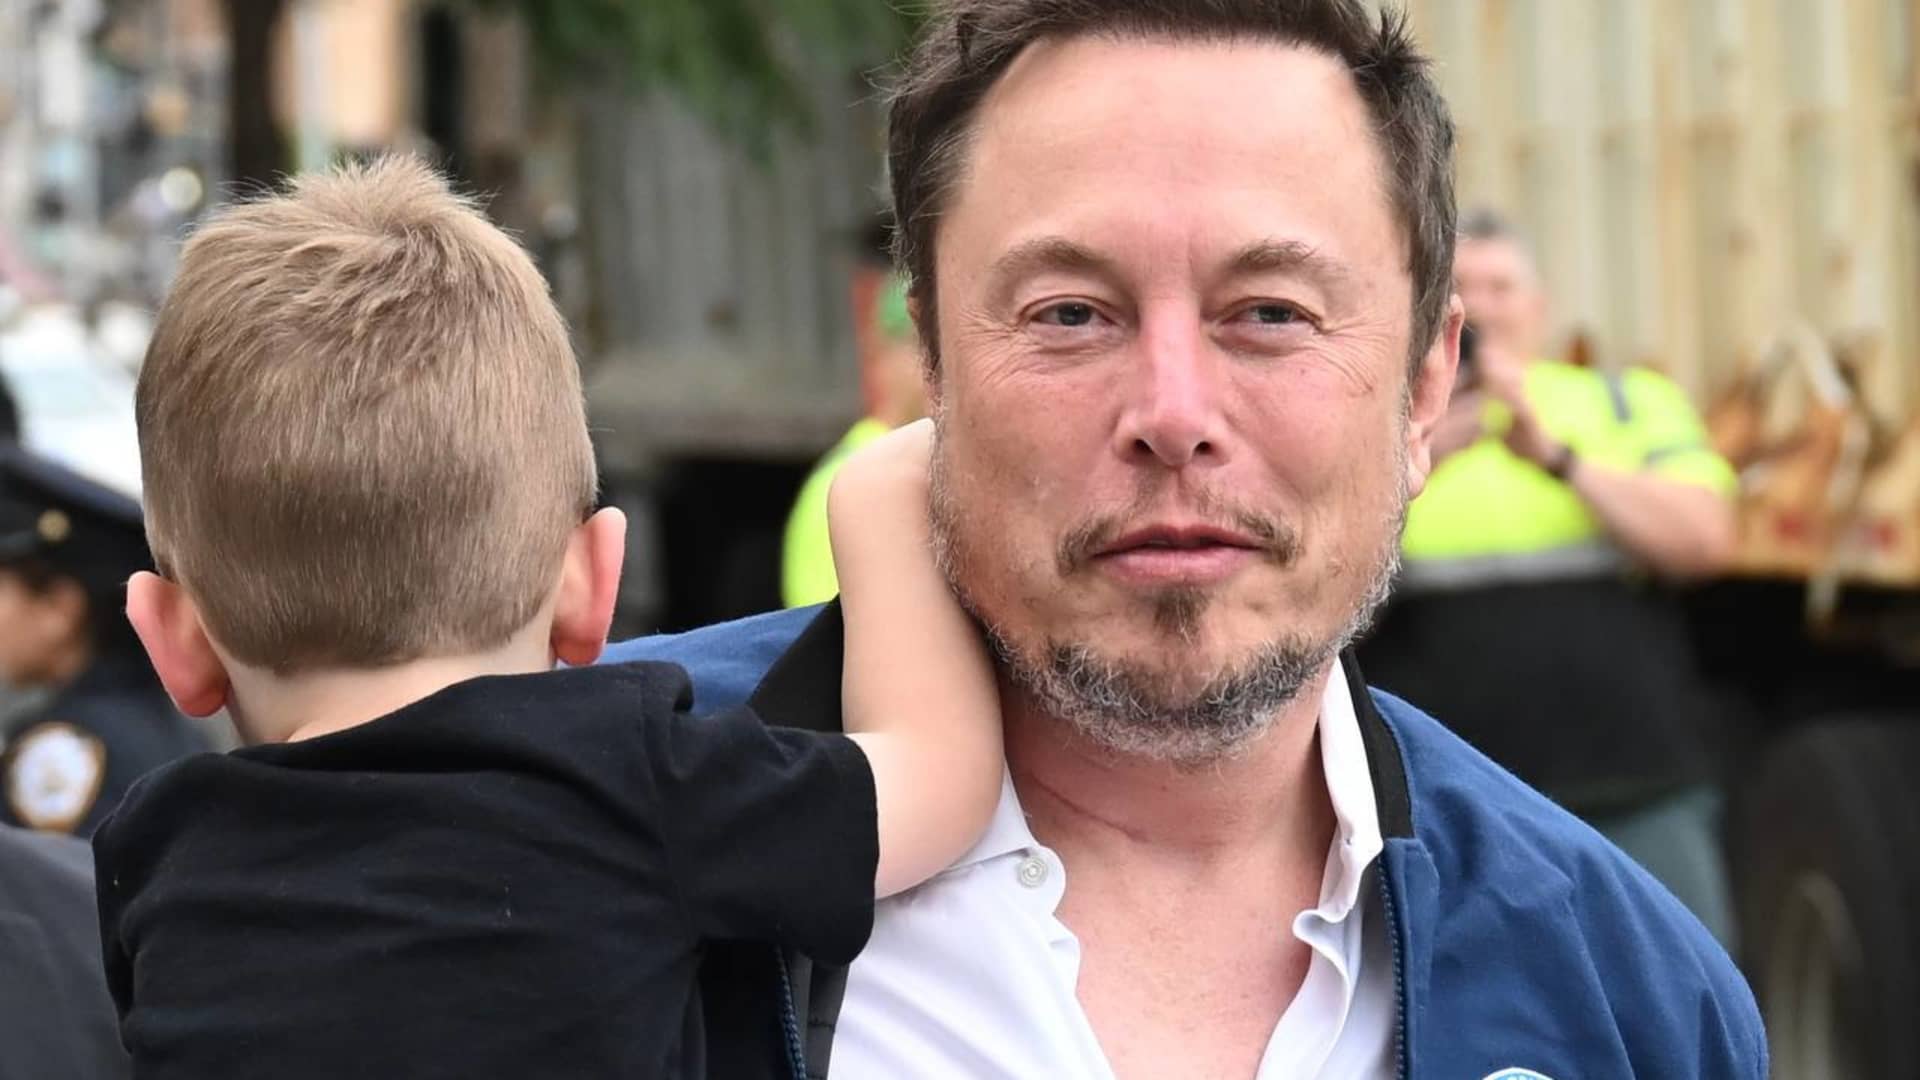 Elon Musk’s X illegally fired employee who publicly challenged return-to-work plans, NLRB alleges